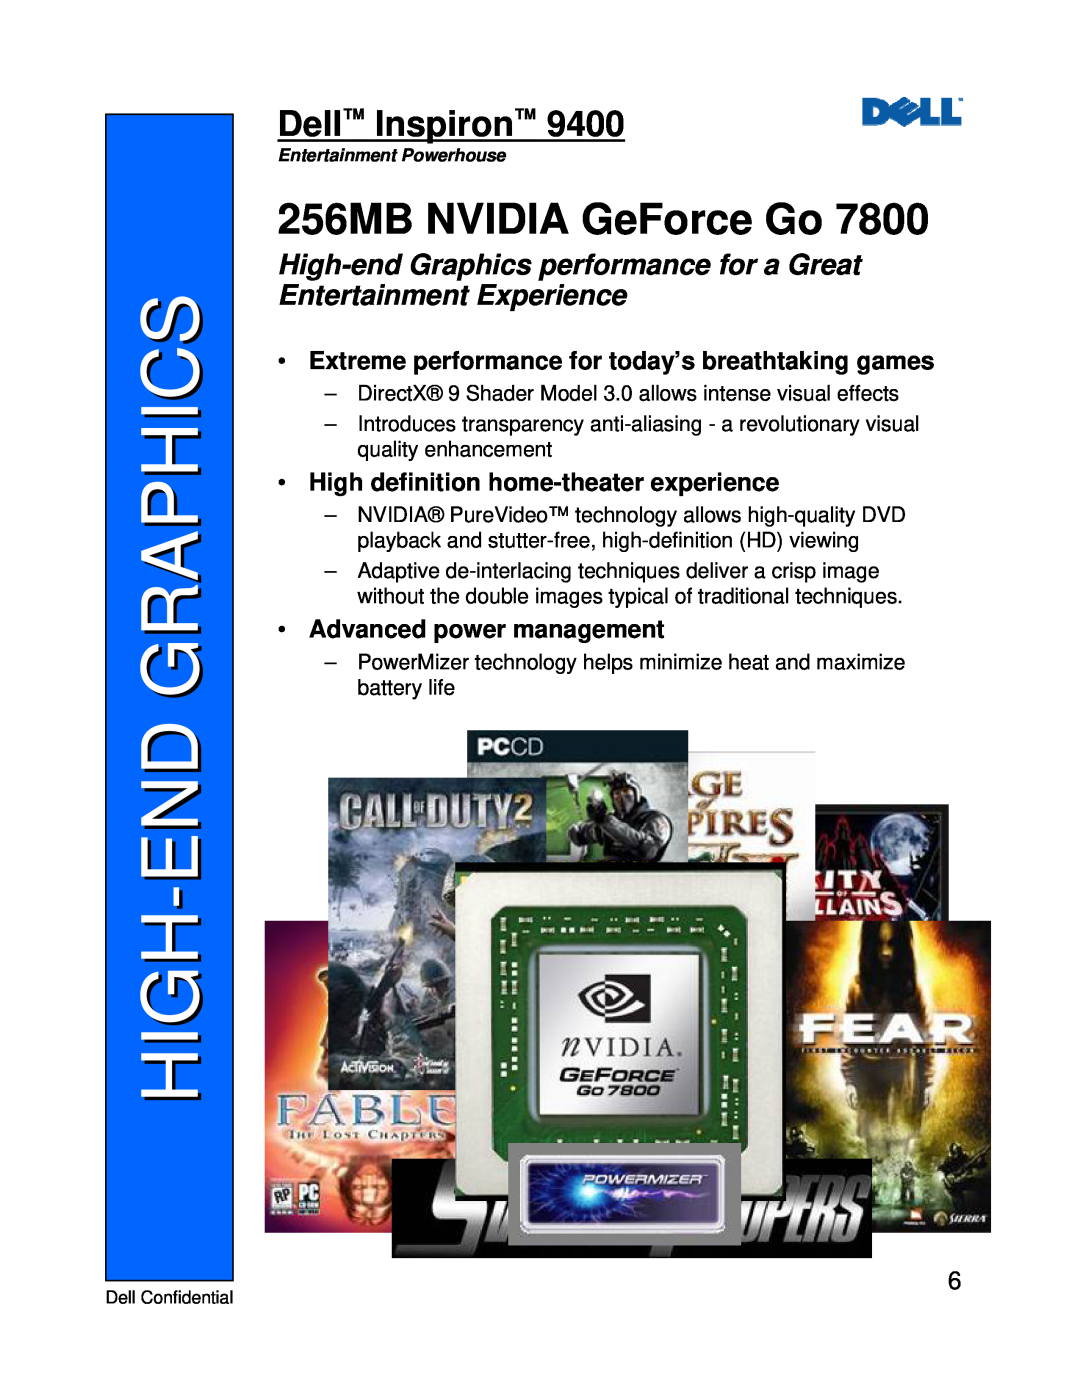 Dell 9400 High-End Graphics, 256MB NVIDIA GeForce Go, Dell Inspiron, Extreme performance for today’s breathtaking games 